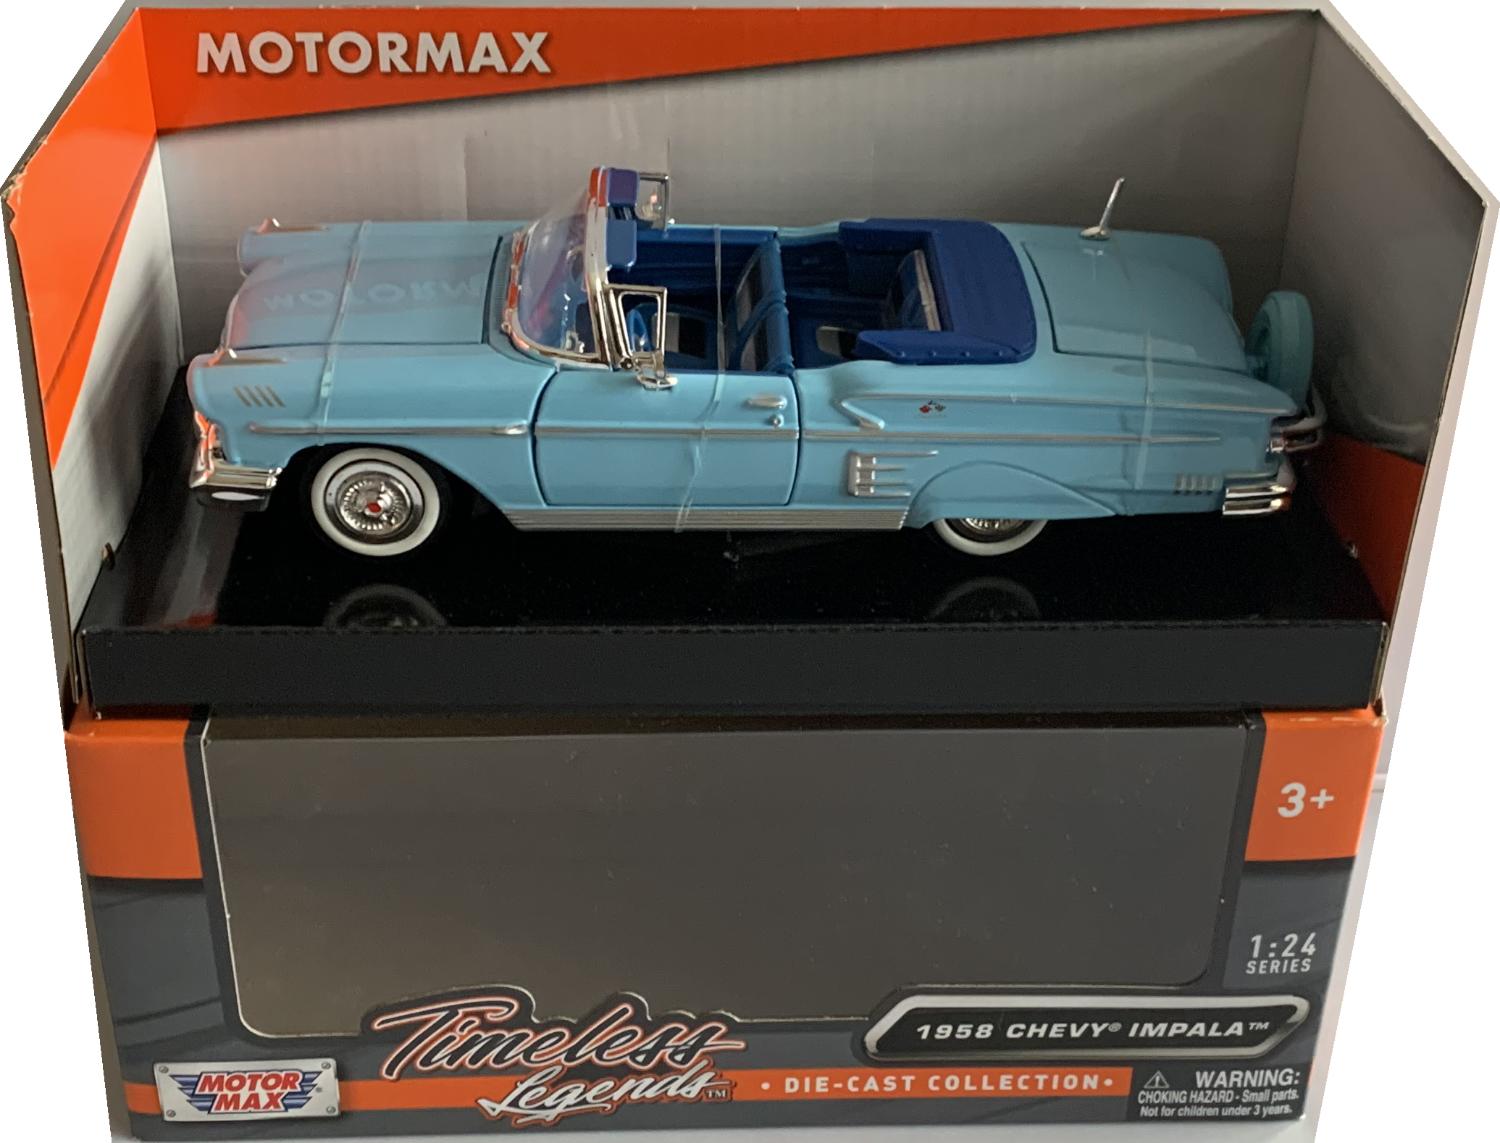 A good reproduction of the Chevrolet Impala Convertible with detail throughout, all authentically recreated.  The model is presented in a window display box, the car is approx. 22 cm long and the presentation box is 24.5 cm